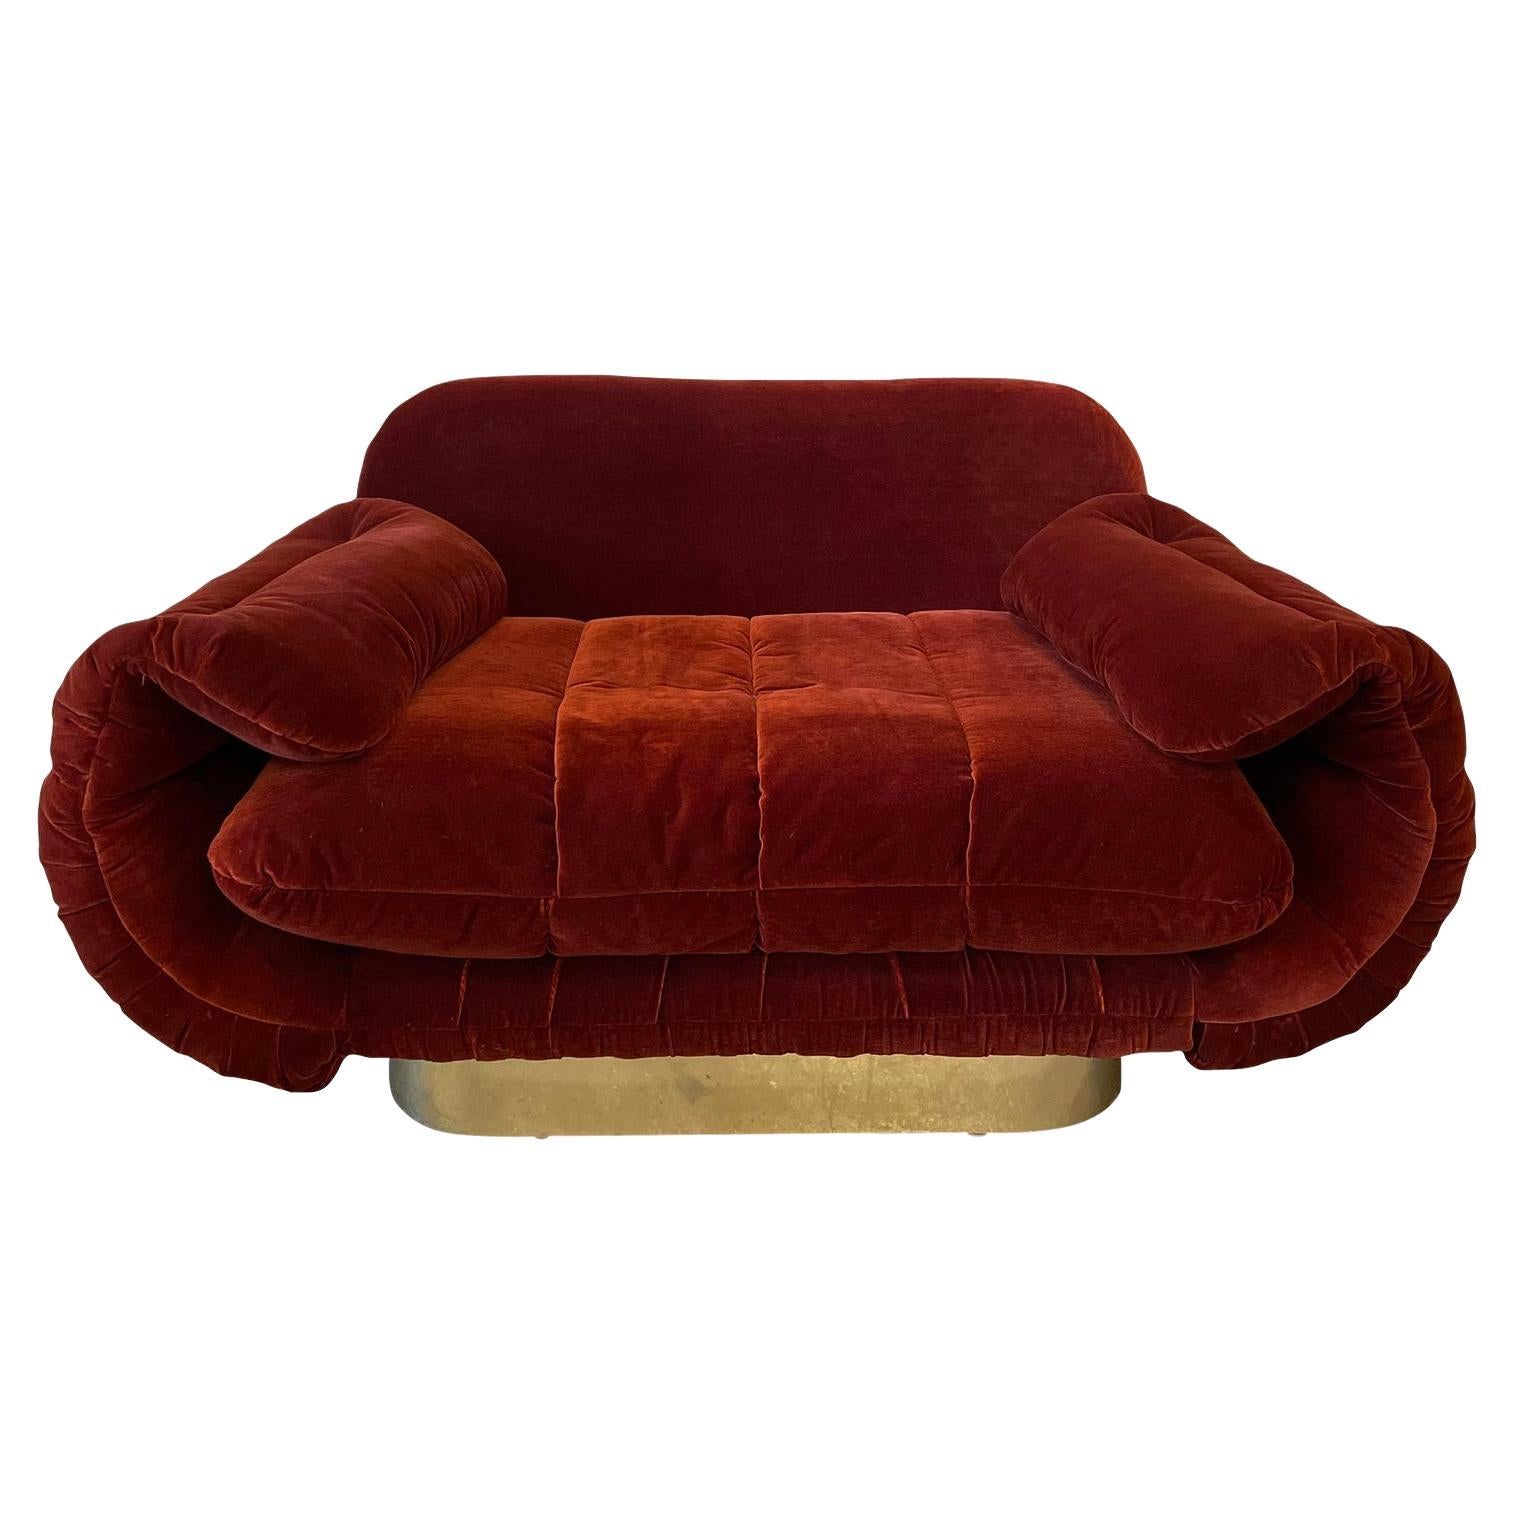 1970s Red Loveseat with Curved Arms & Brass Plinth Base For Sale